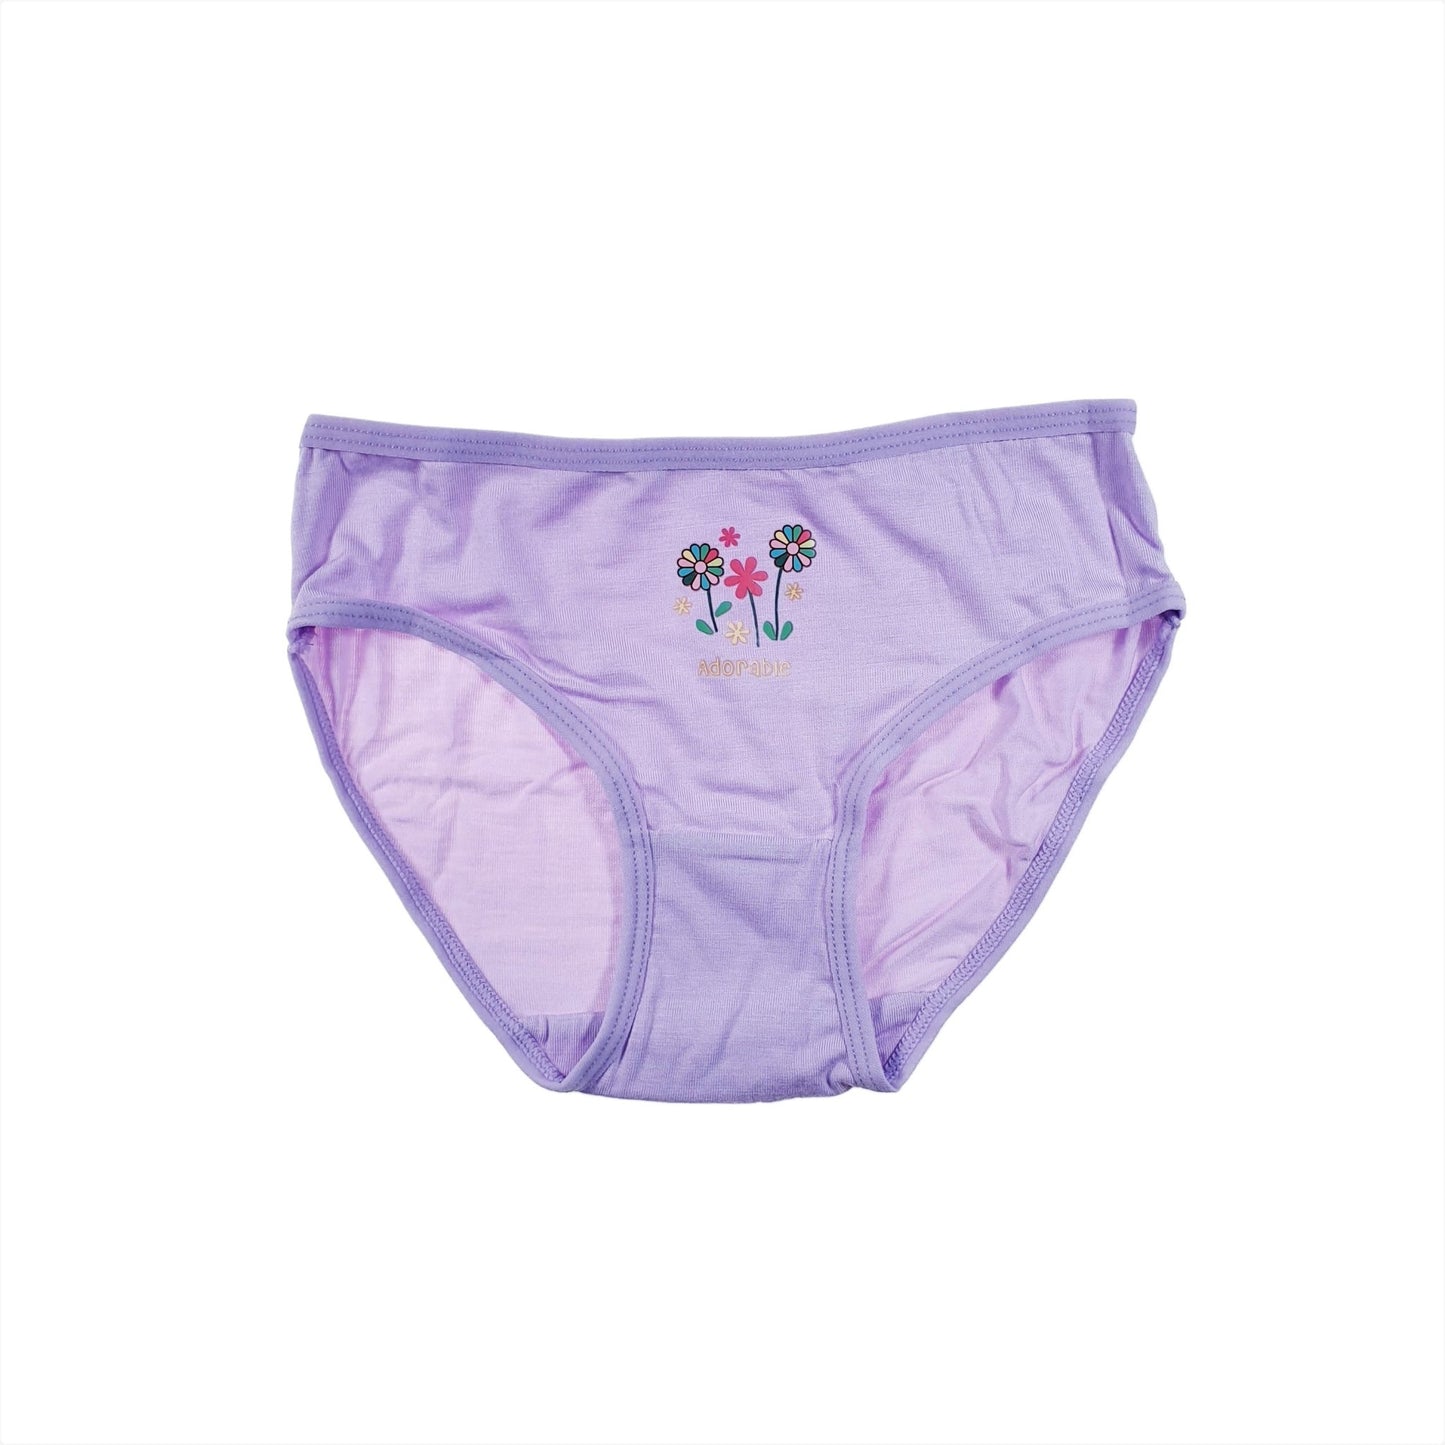 Girls Briefs (5-Pack Set) - Floral - Printed With Elastic Band